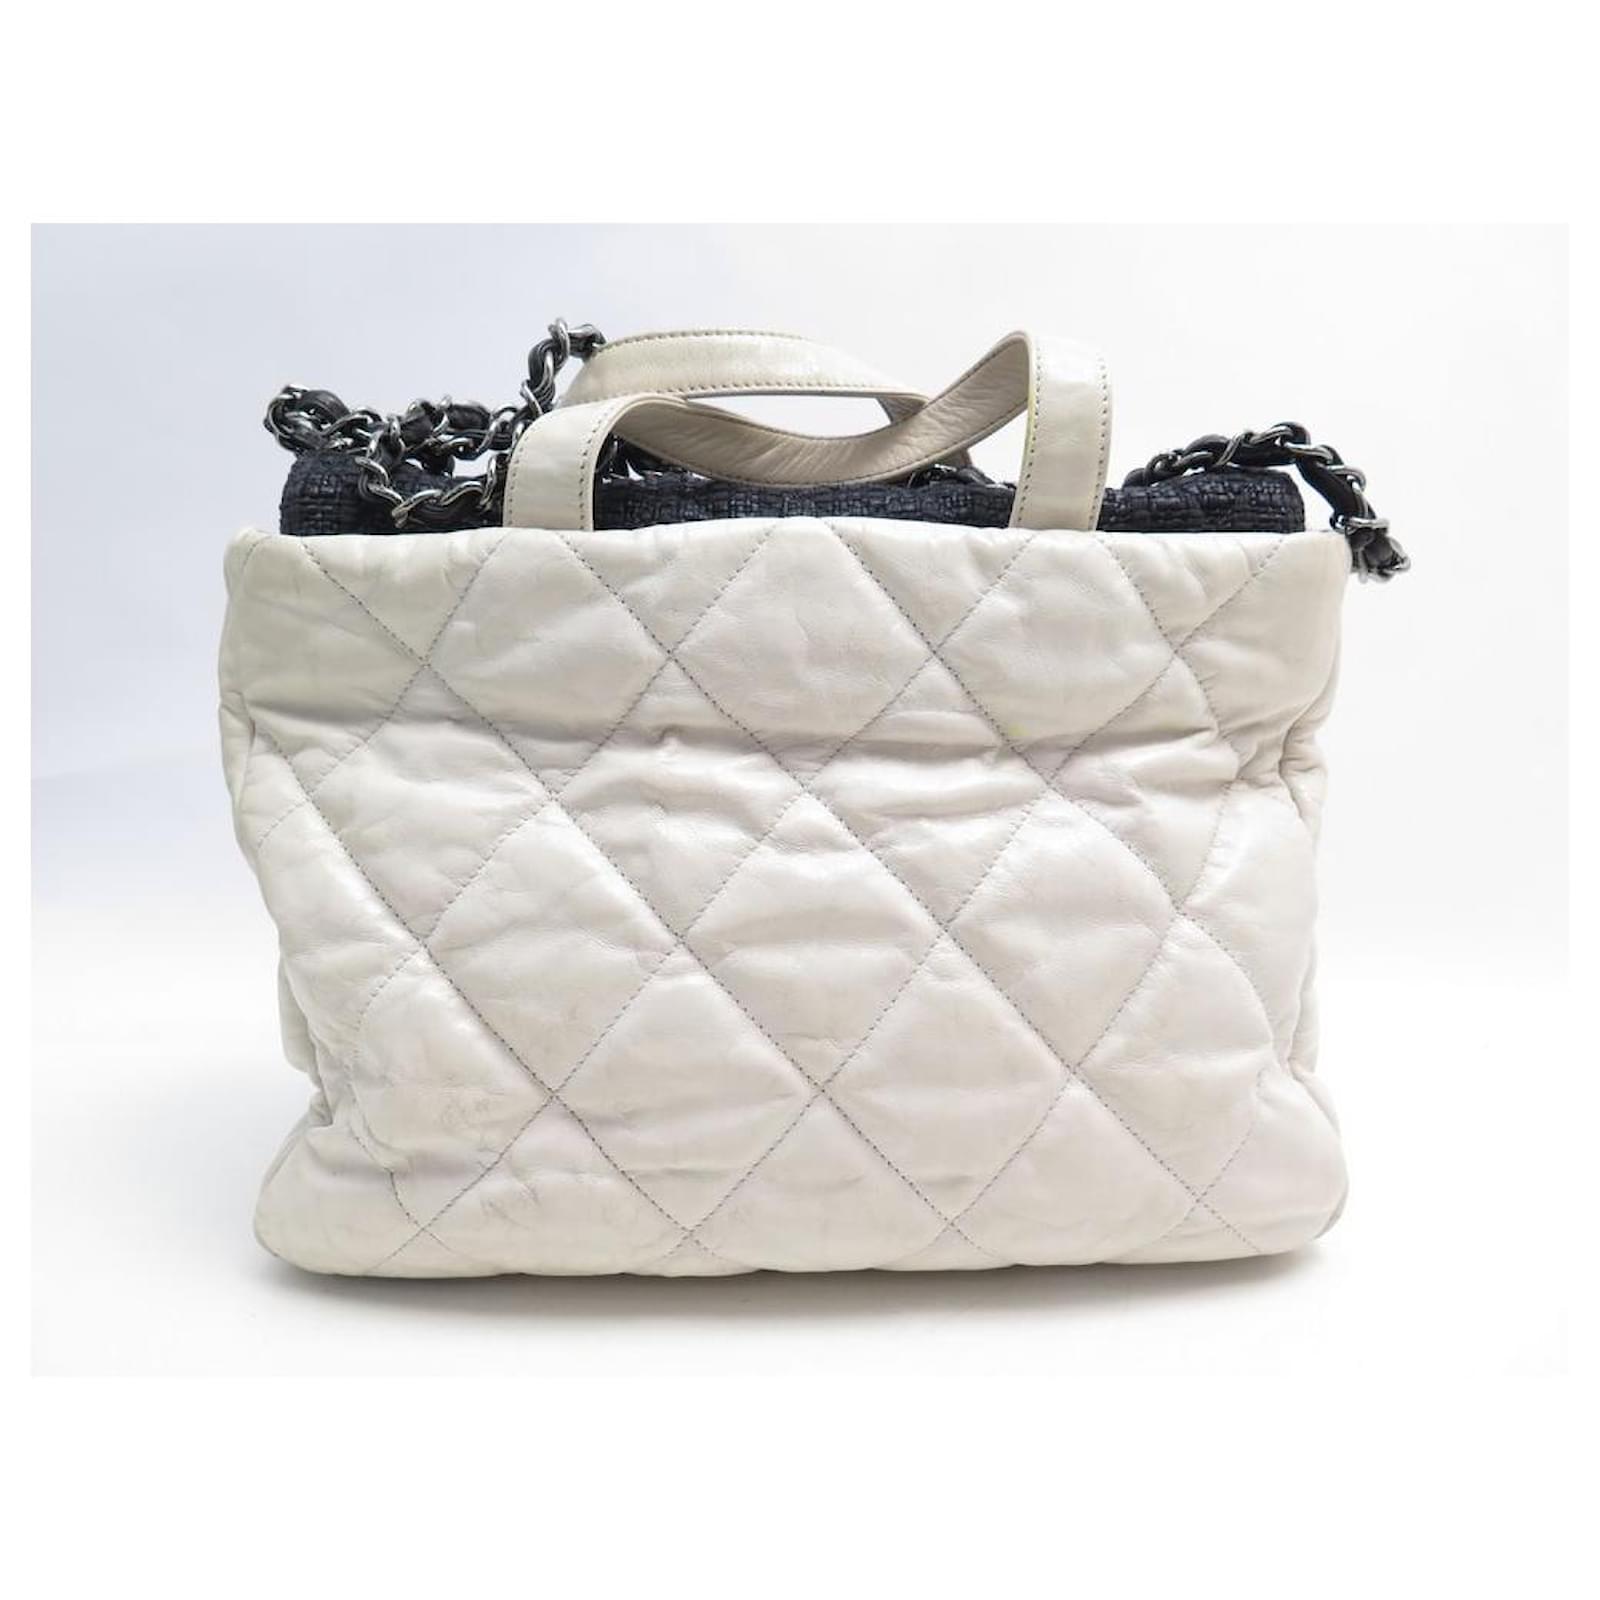 CHANEL CABAS SHOPPING HANDBAG CC LOGO WHITE QUILTED LEATHER